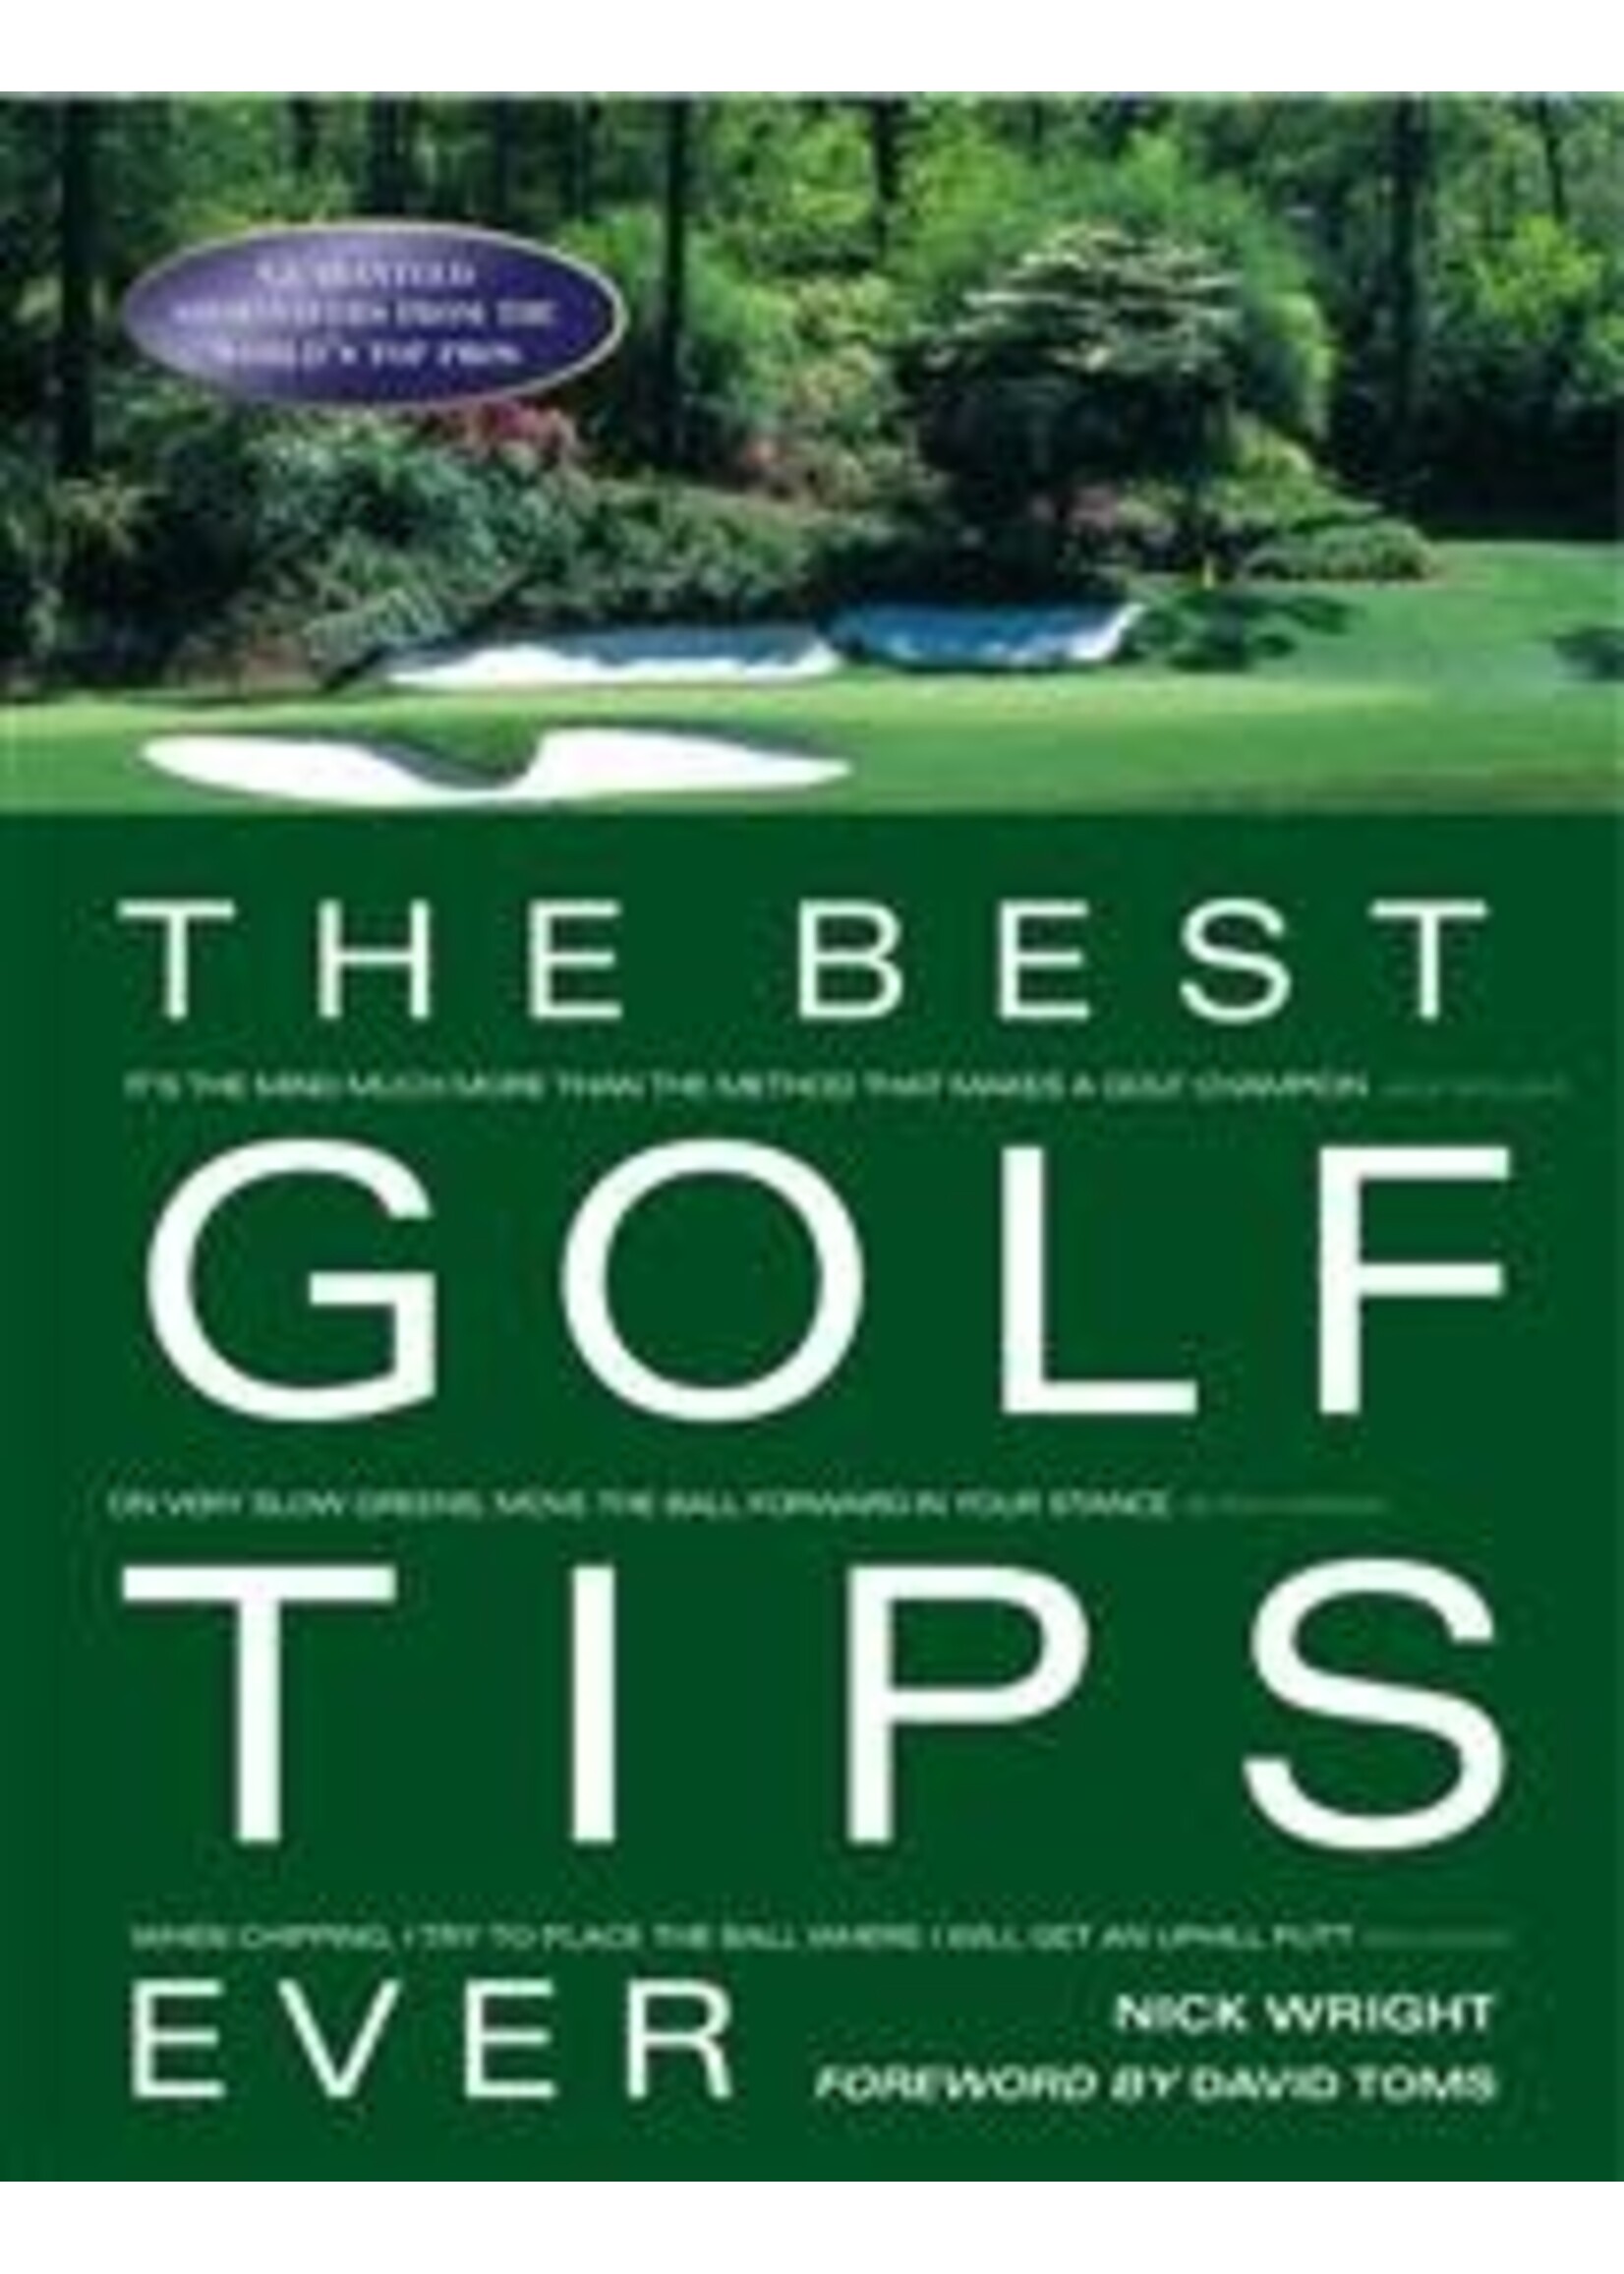 The Best Golf Tips Ever: Guaranteed Shot-Savers from the World's Top Pros by Nick Wright